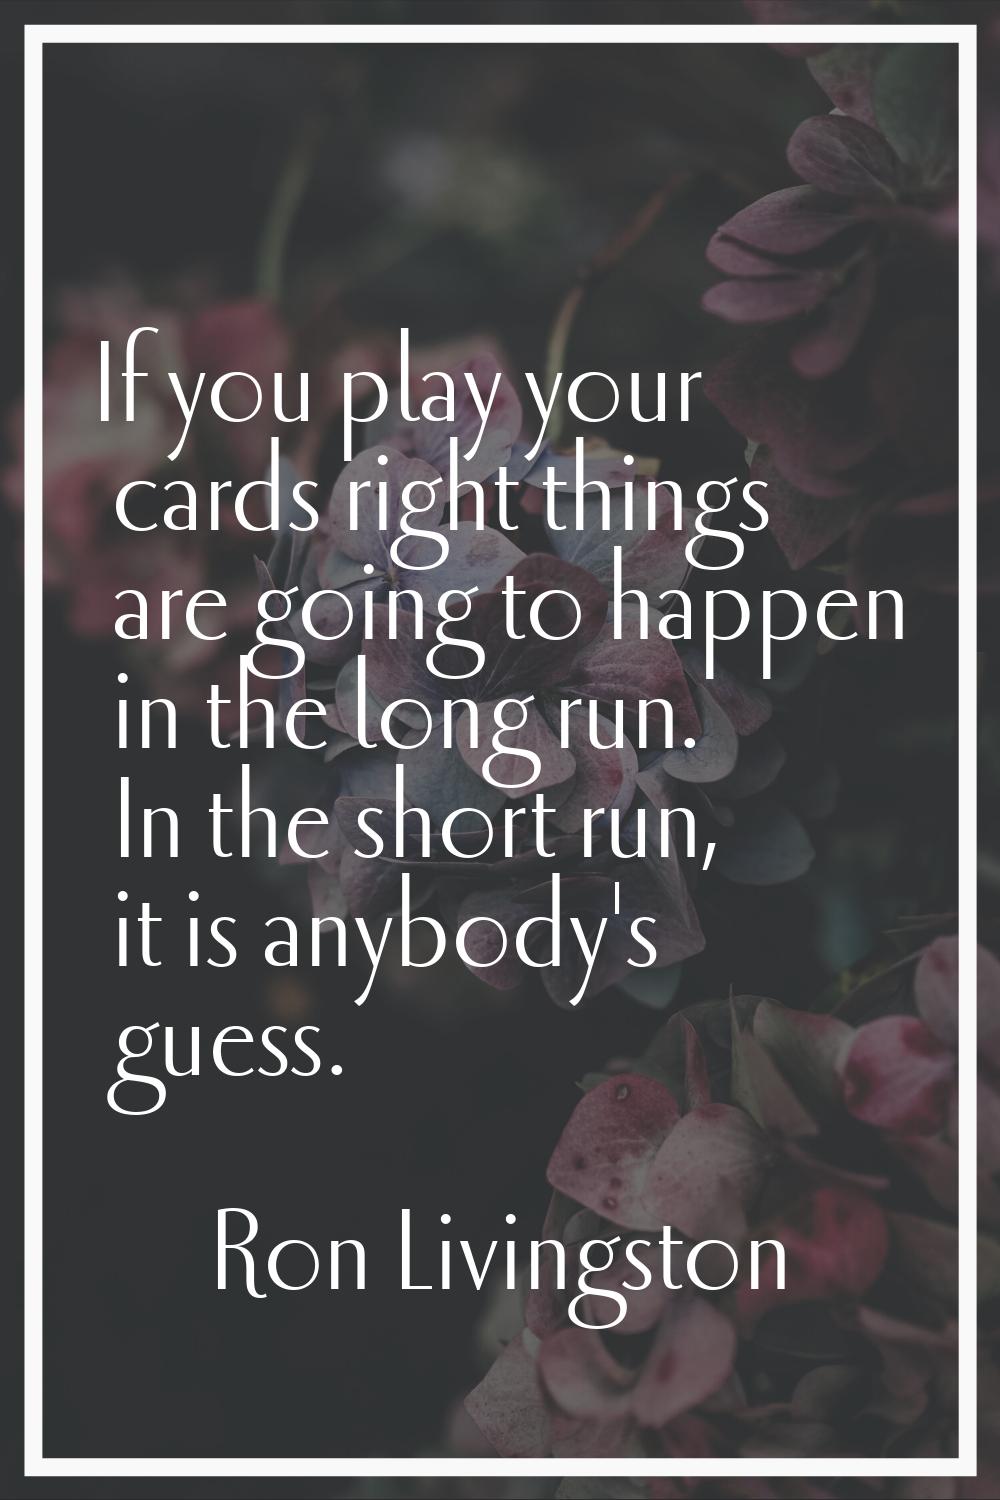 If you play your cards right things are going to happen in the long run. In the short run, it is an